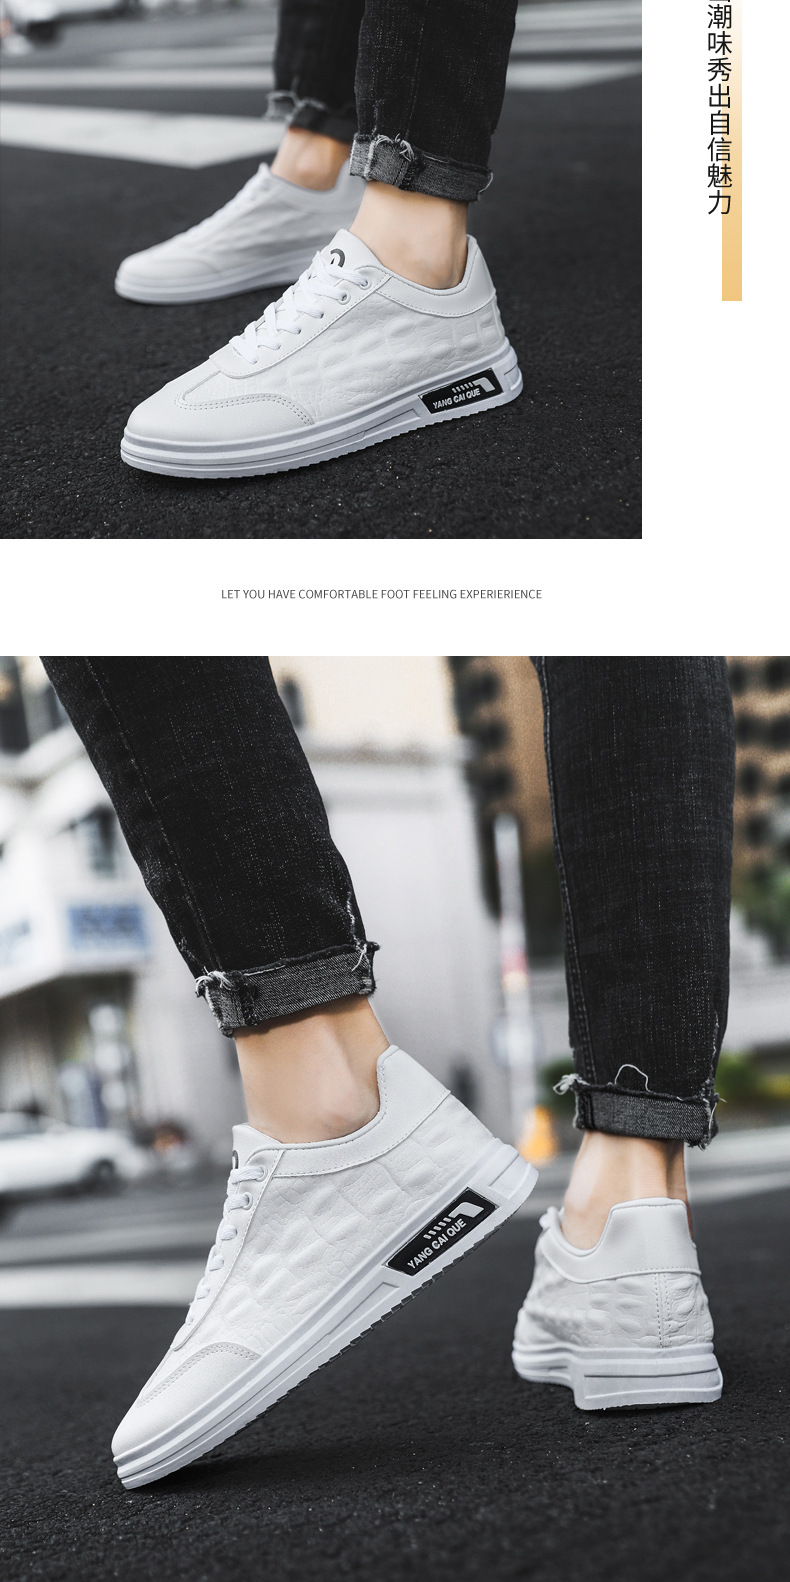 The new men's shoes are stylish men's board shoes, comfortable and personalized